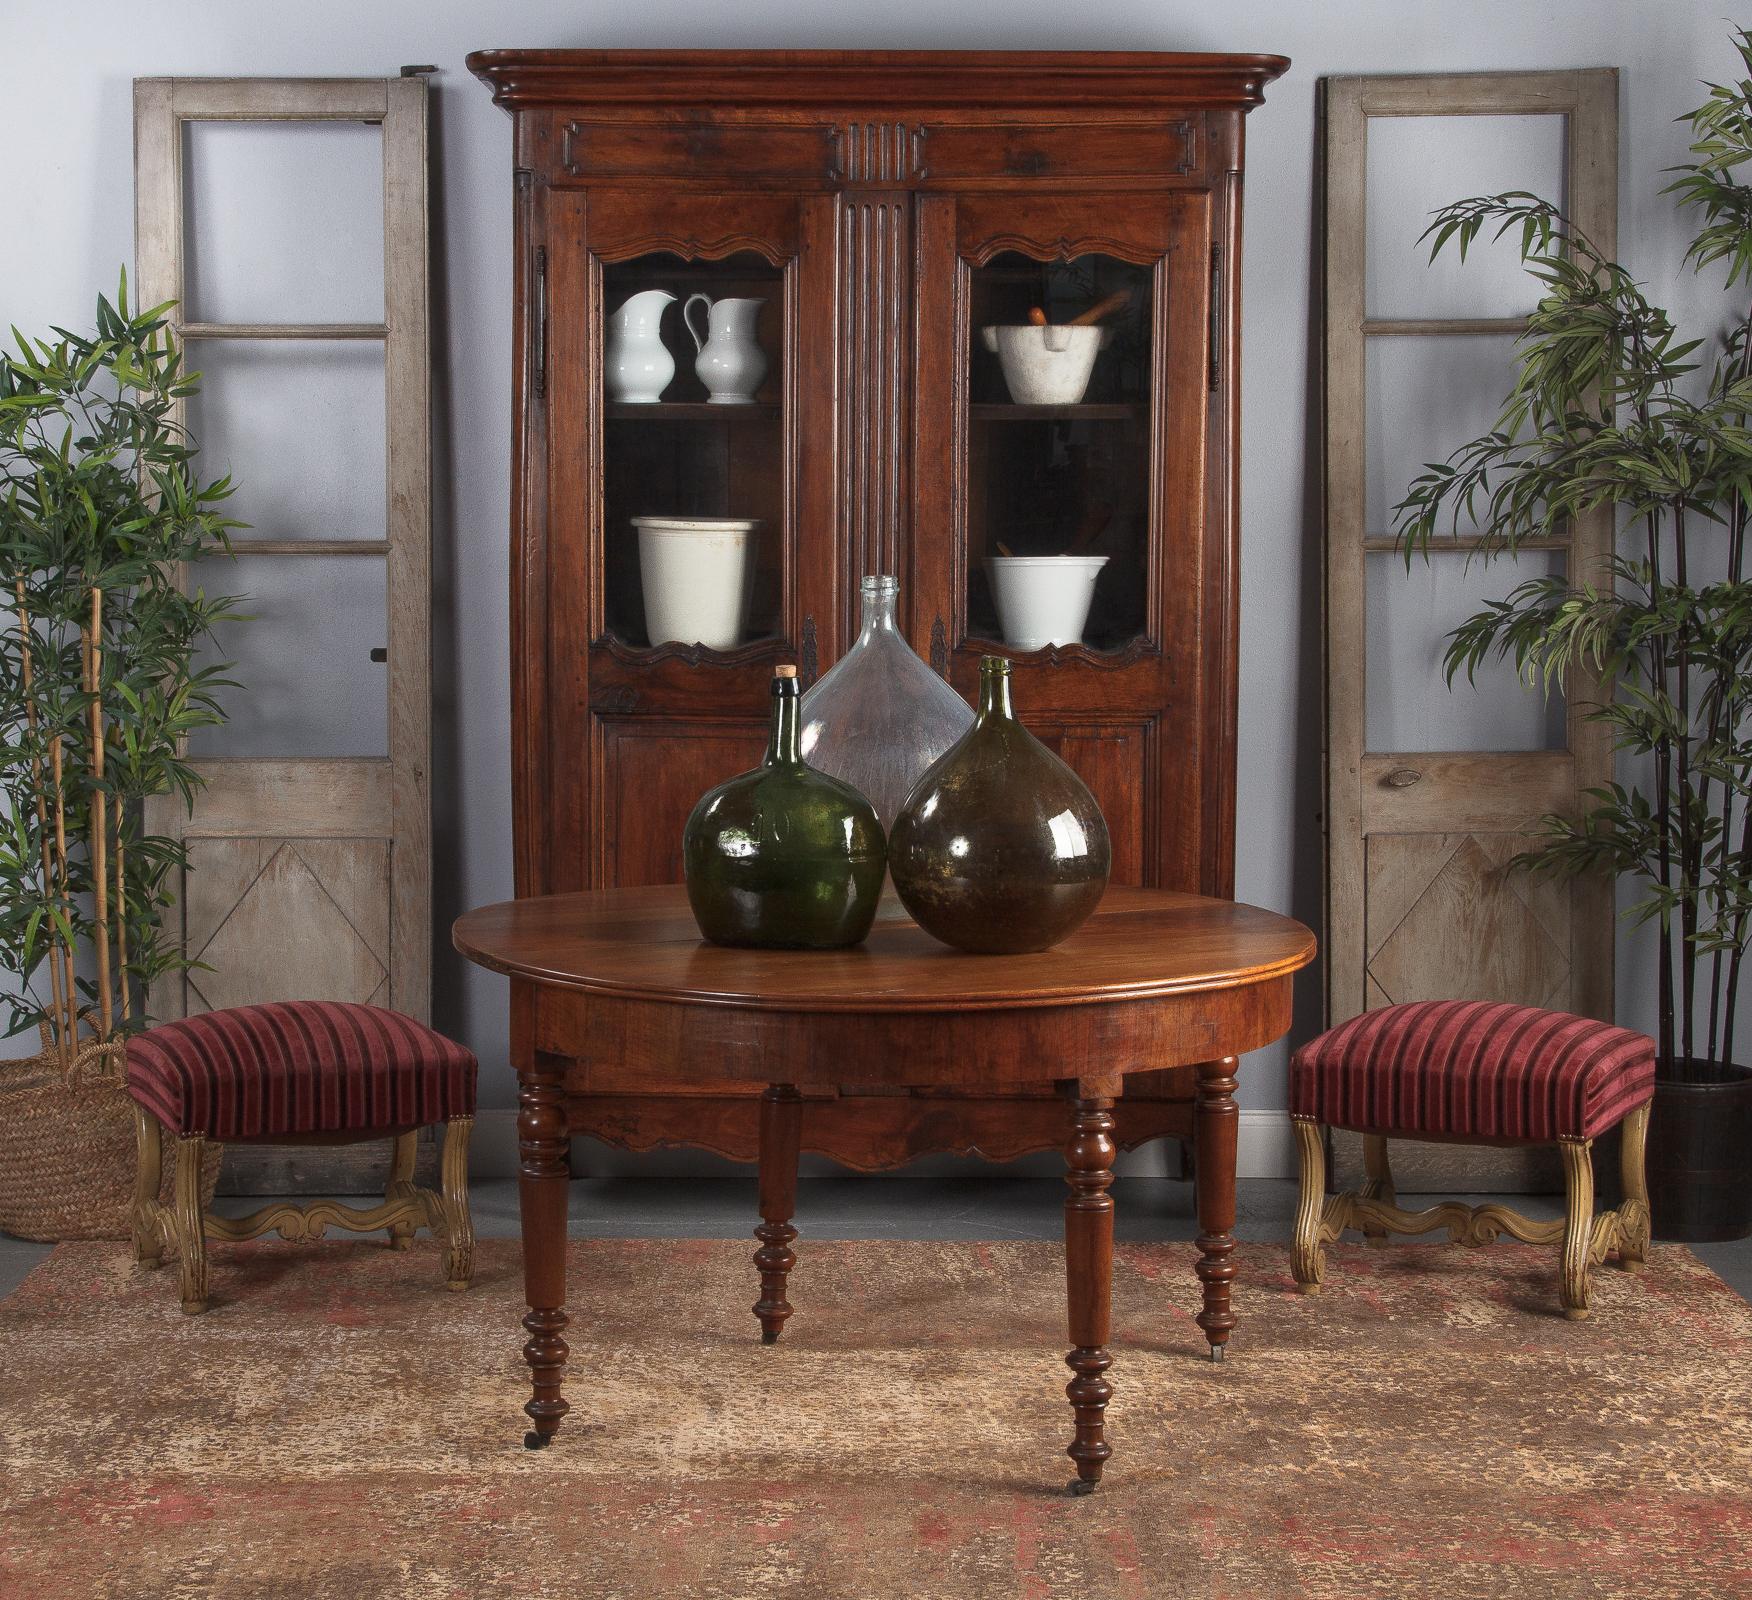 A stunning 18th century armoire that combines the Louis XIV and the Louis XV styles. Purchased in the Rhone Valley, the armoire is made of solid dark walnut with a gorgeous patina. The top parts of the paneled doors were later changes to glass to